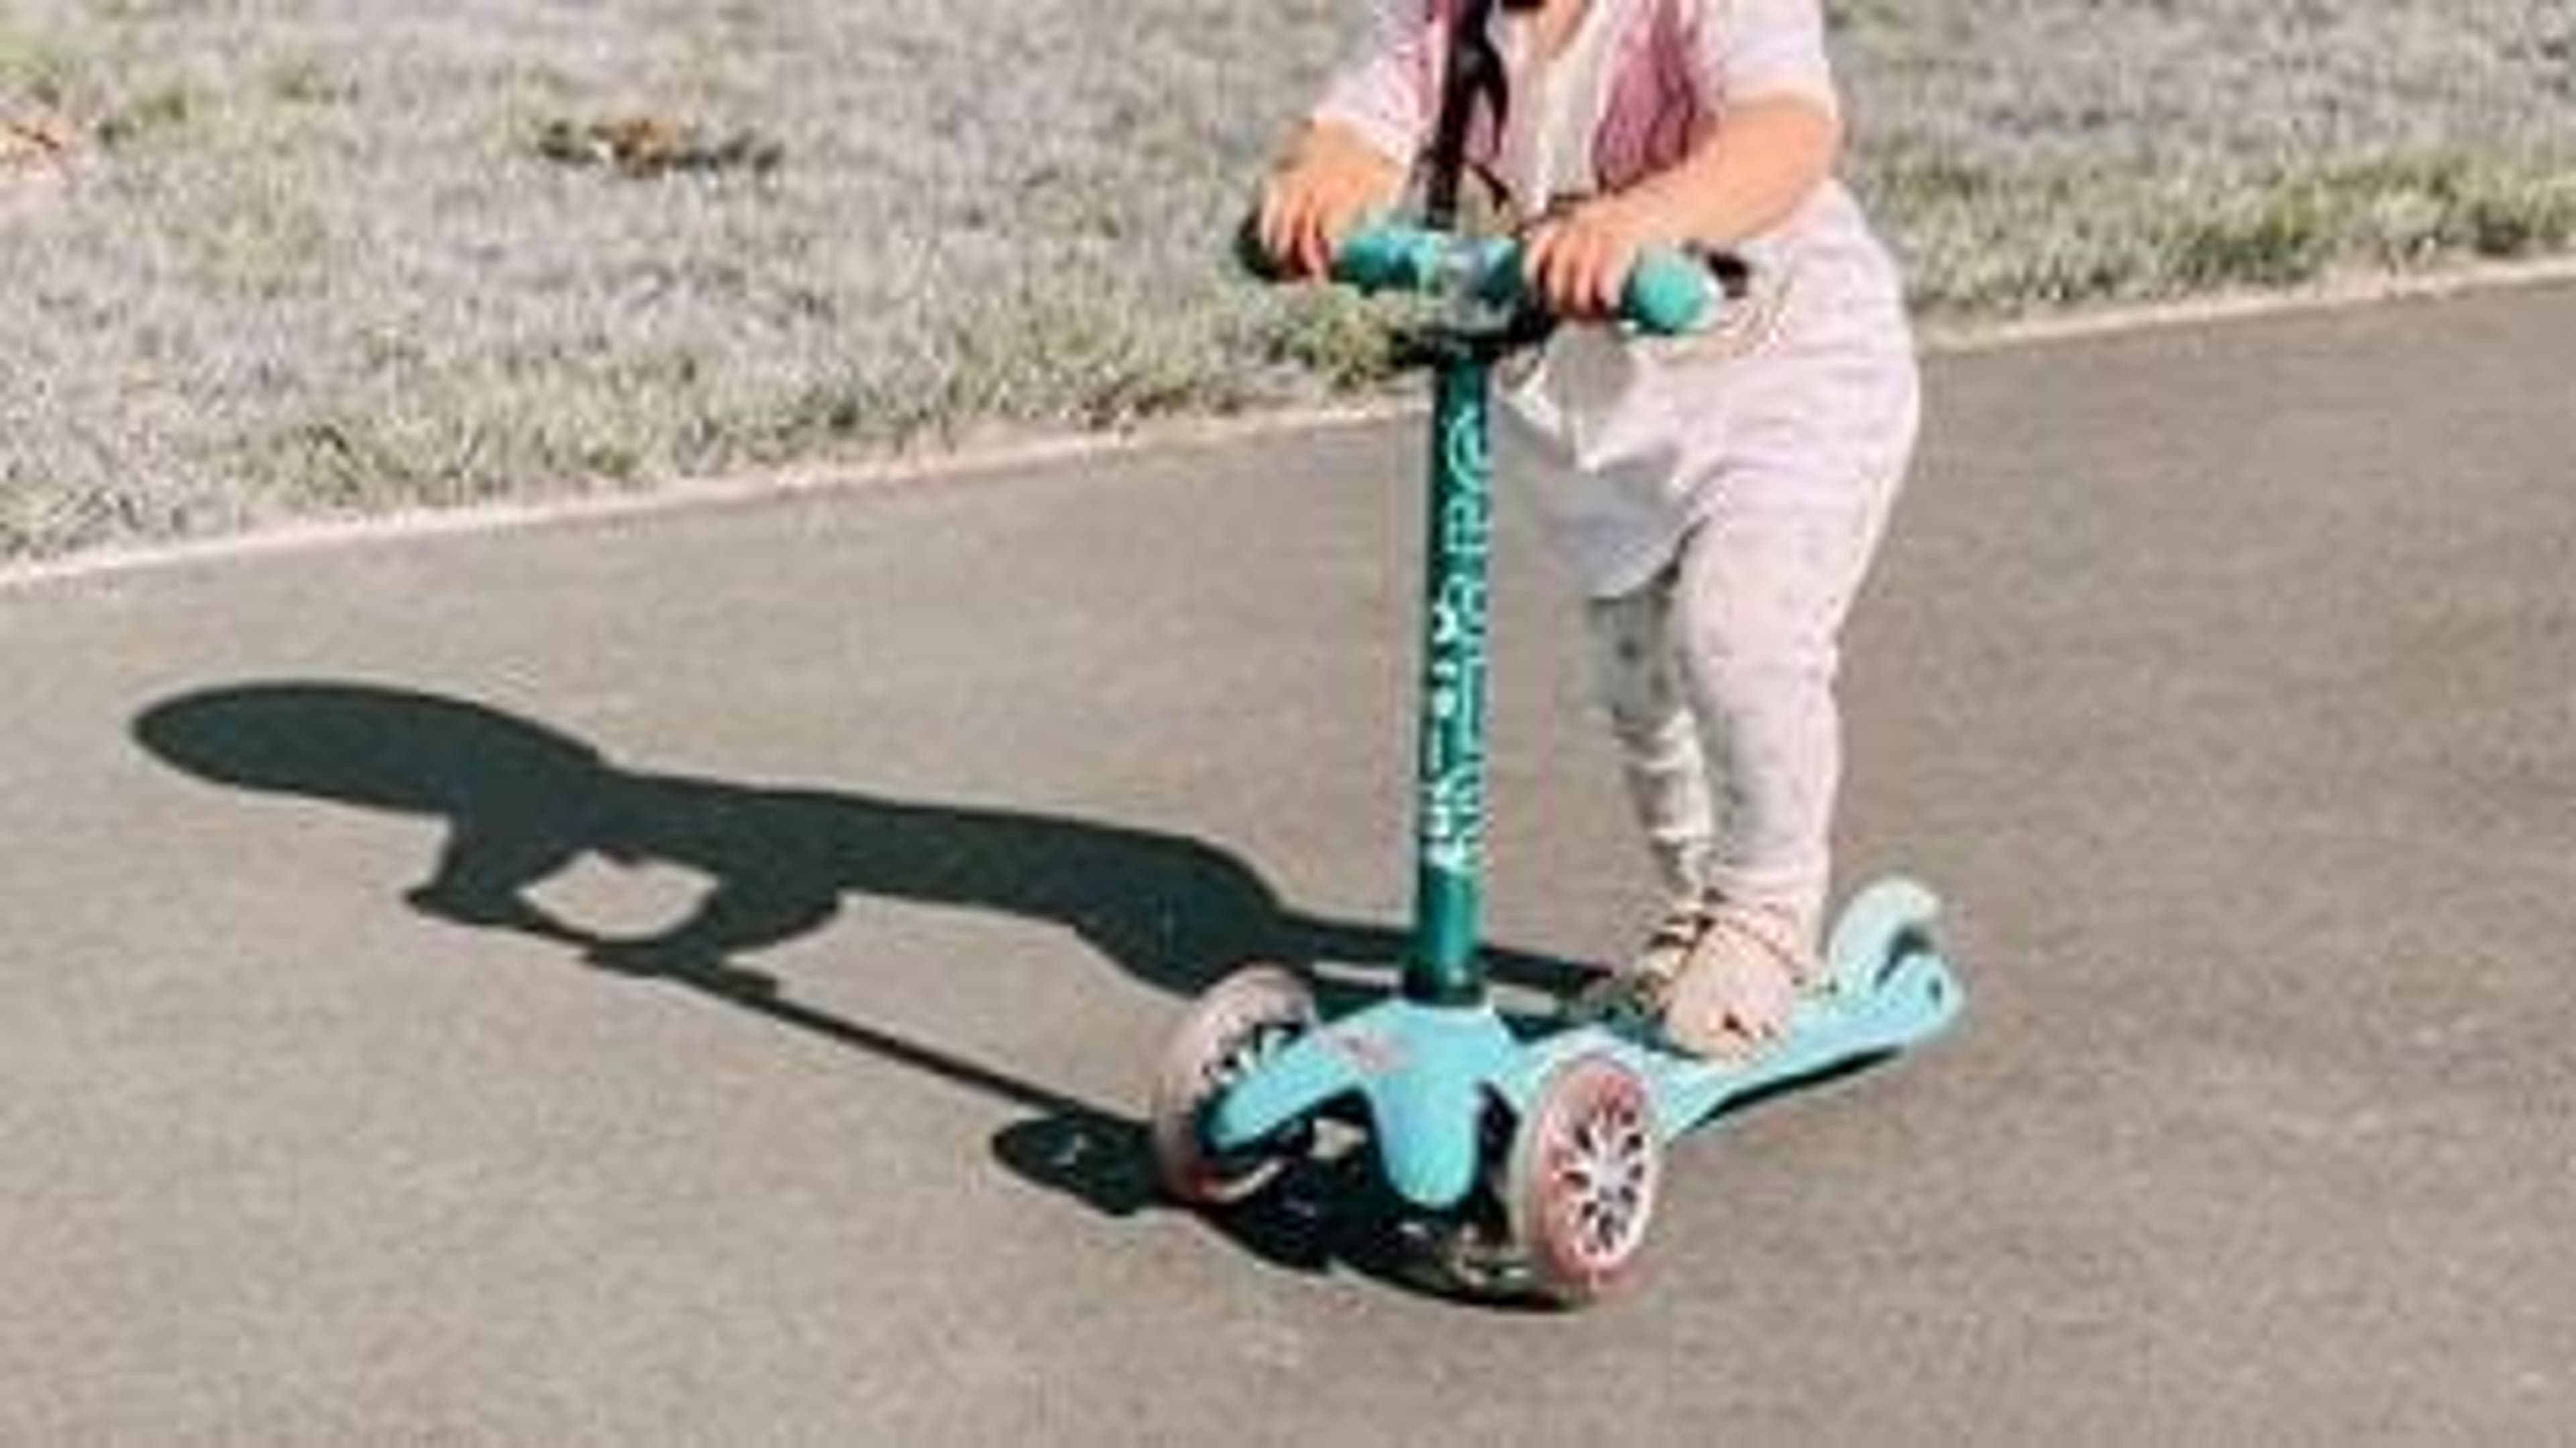  A child rides a personalised scooter from Micro Scooters 